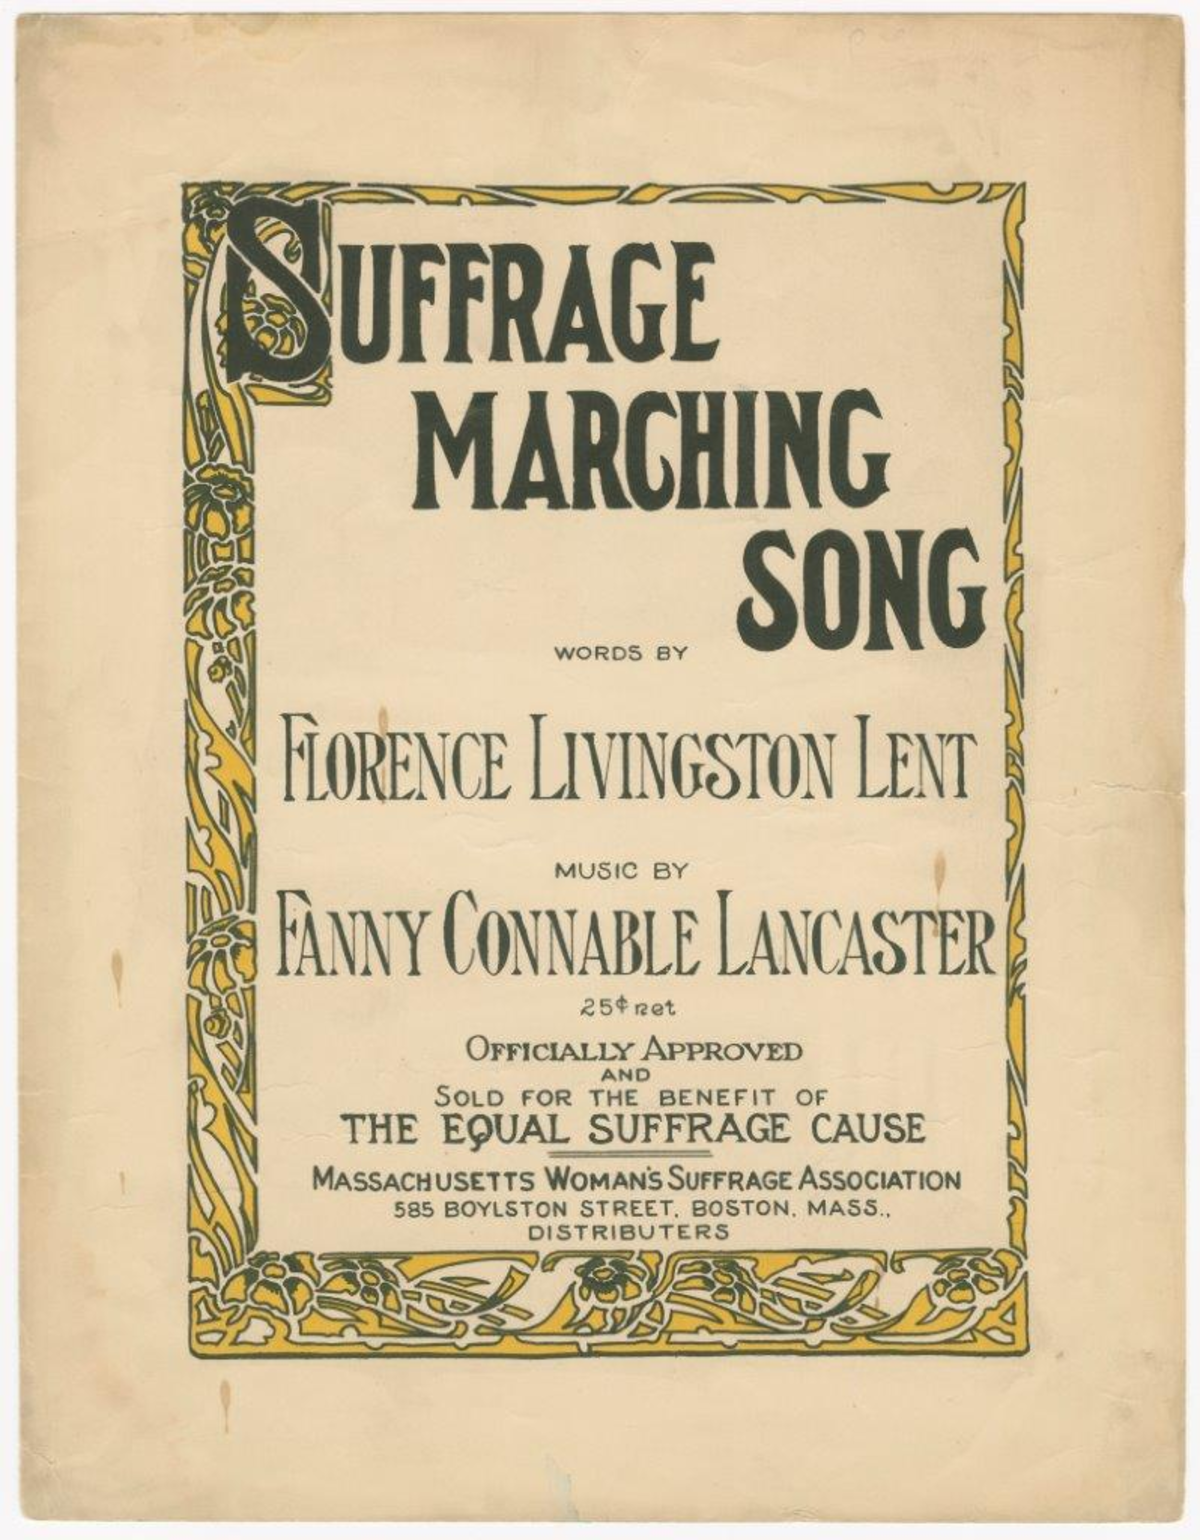 “Suffrage Marching Song,” words by Florence Livingston Lent and music by Fanny Conable Lancaster, printed by the Massachusetts Women’s Suffrage Association, 1914